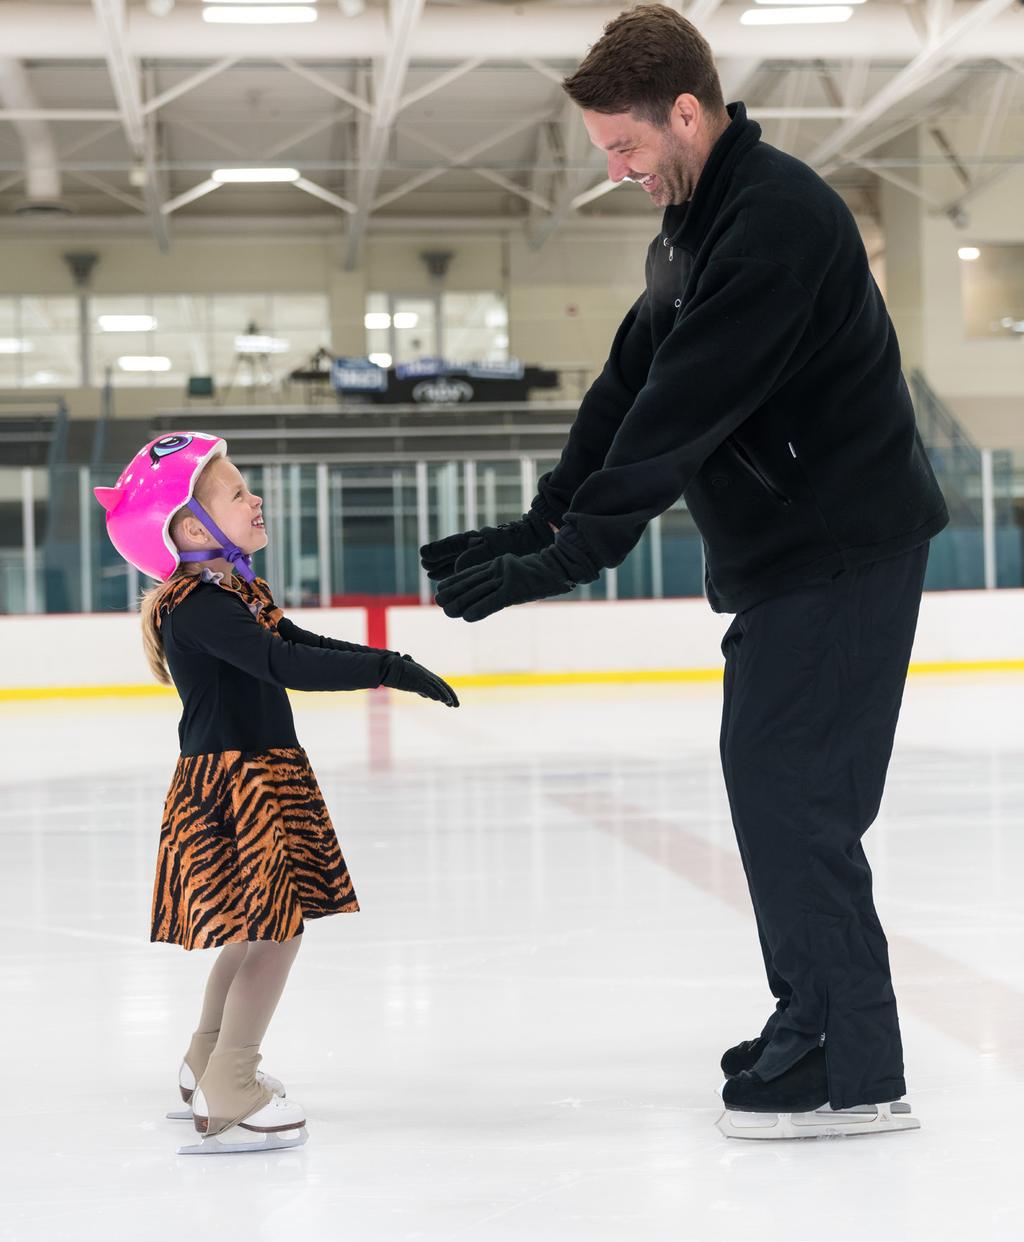 Stay cool with ice skating &